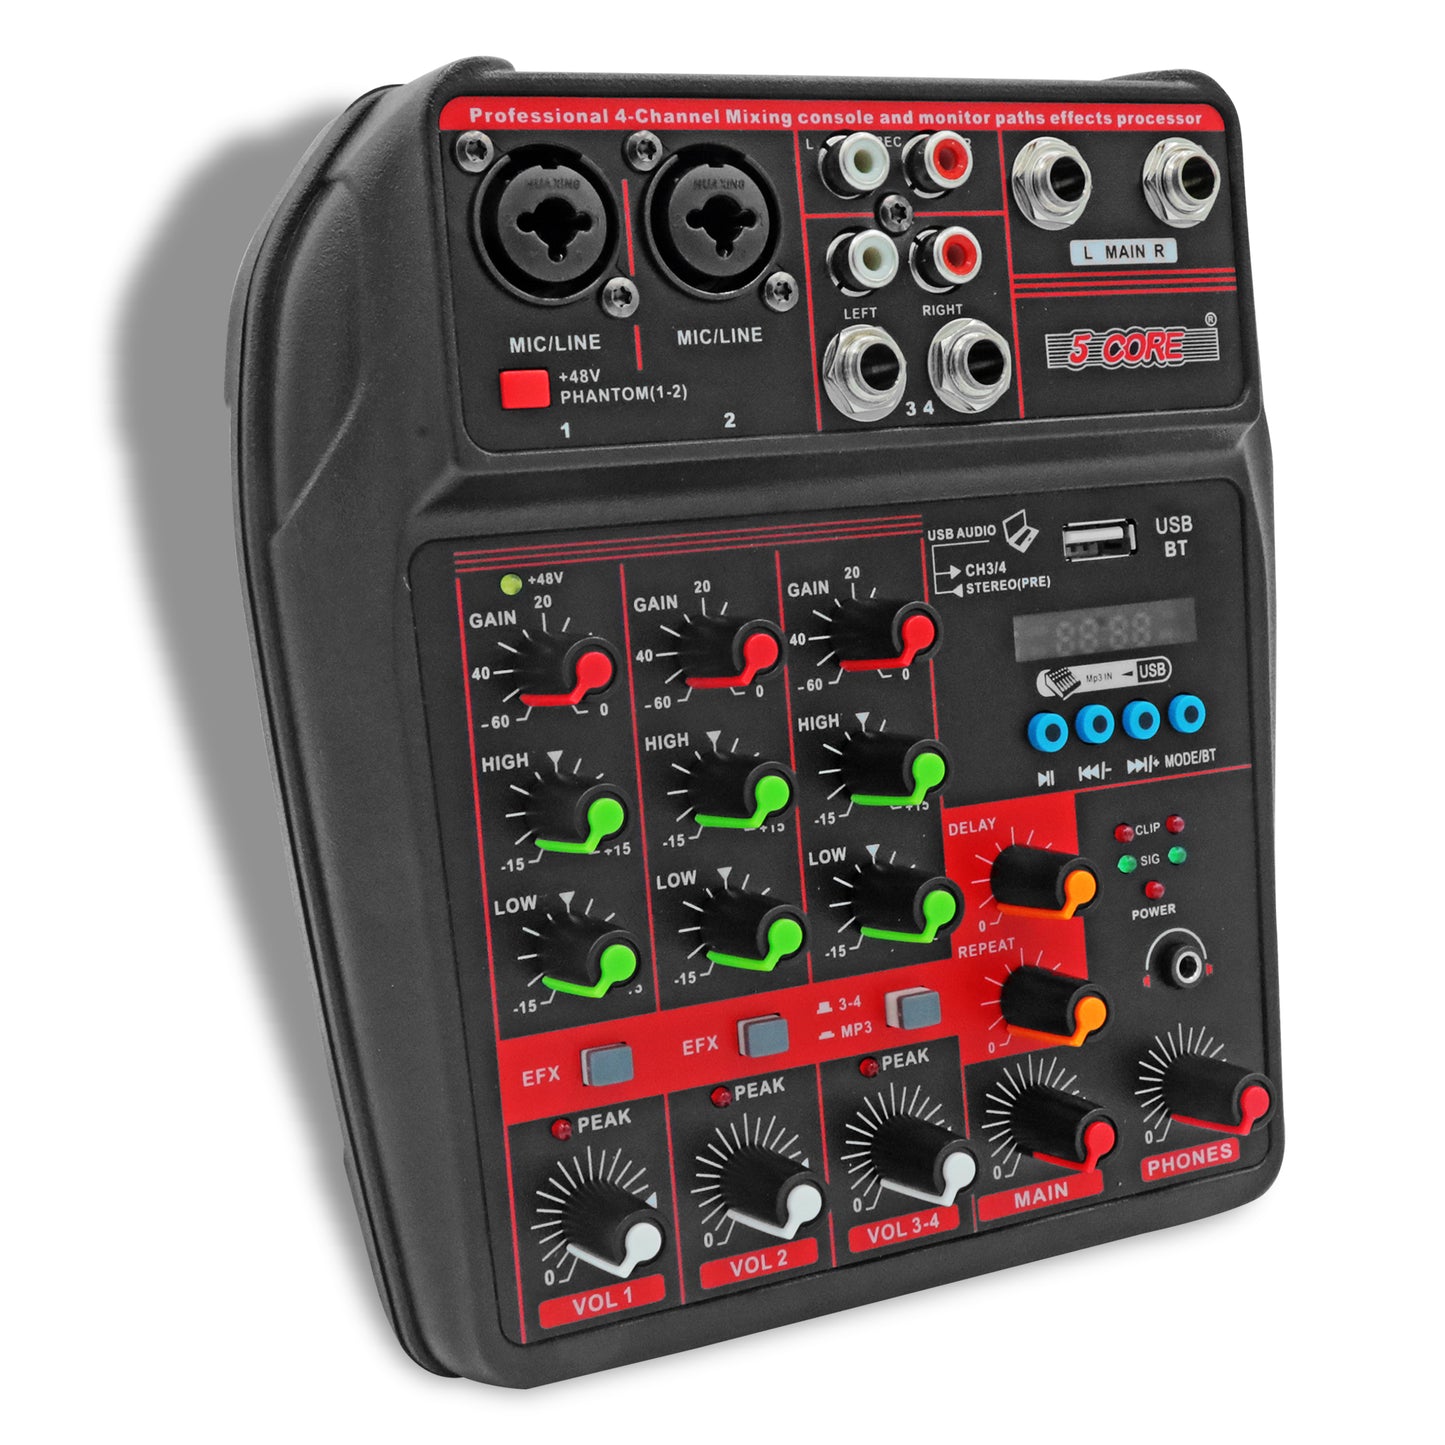 5 Core 4 Channel Compact Studio Mixer with Built-In Effects & USB Interface Bluetooth- Digital Mixer for Home Studio Recording, Podcast DJs and more MX 4CH